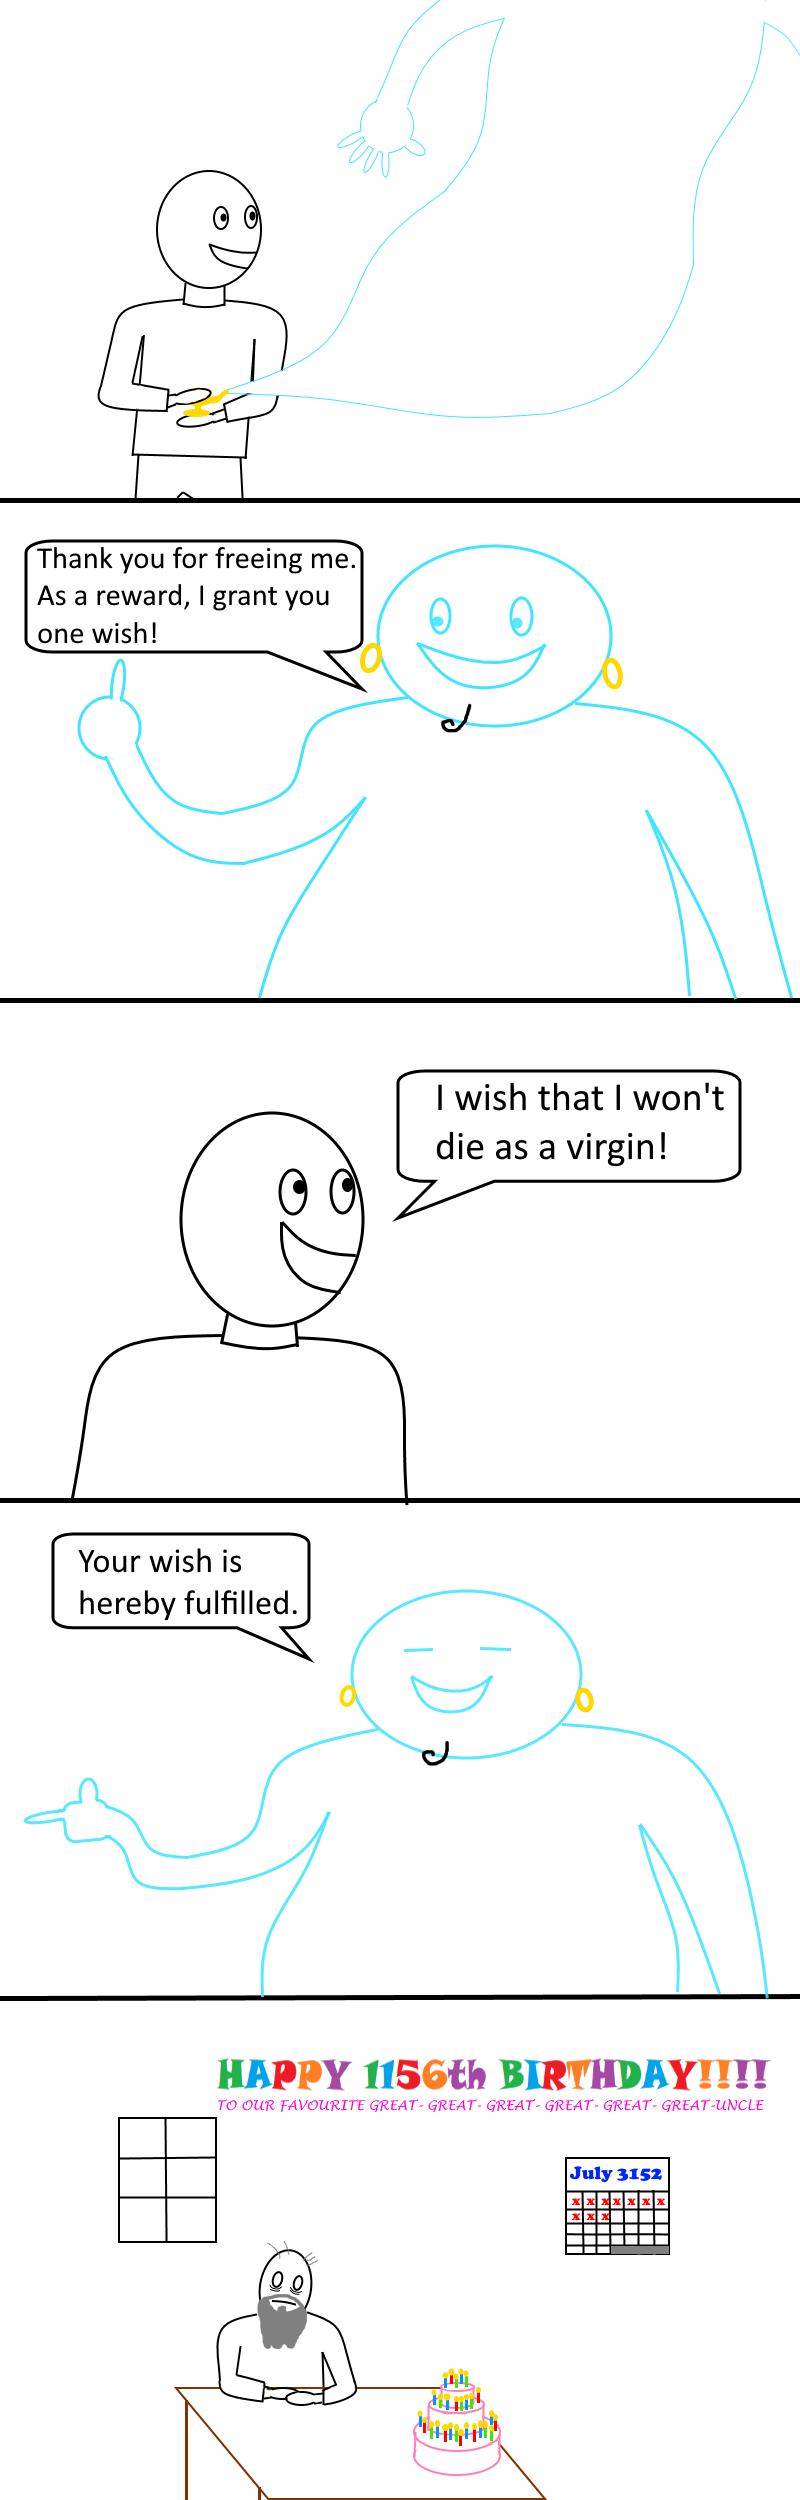 Made in Paint.net [OC]